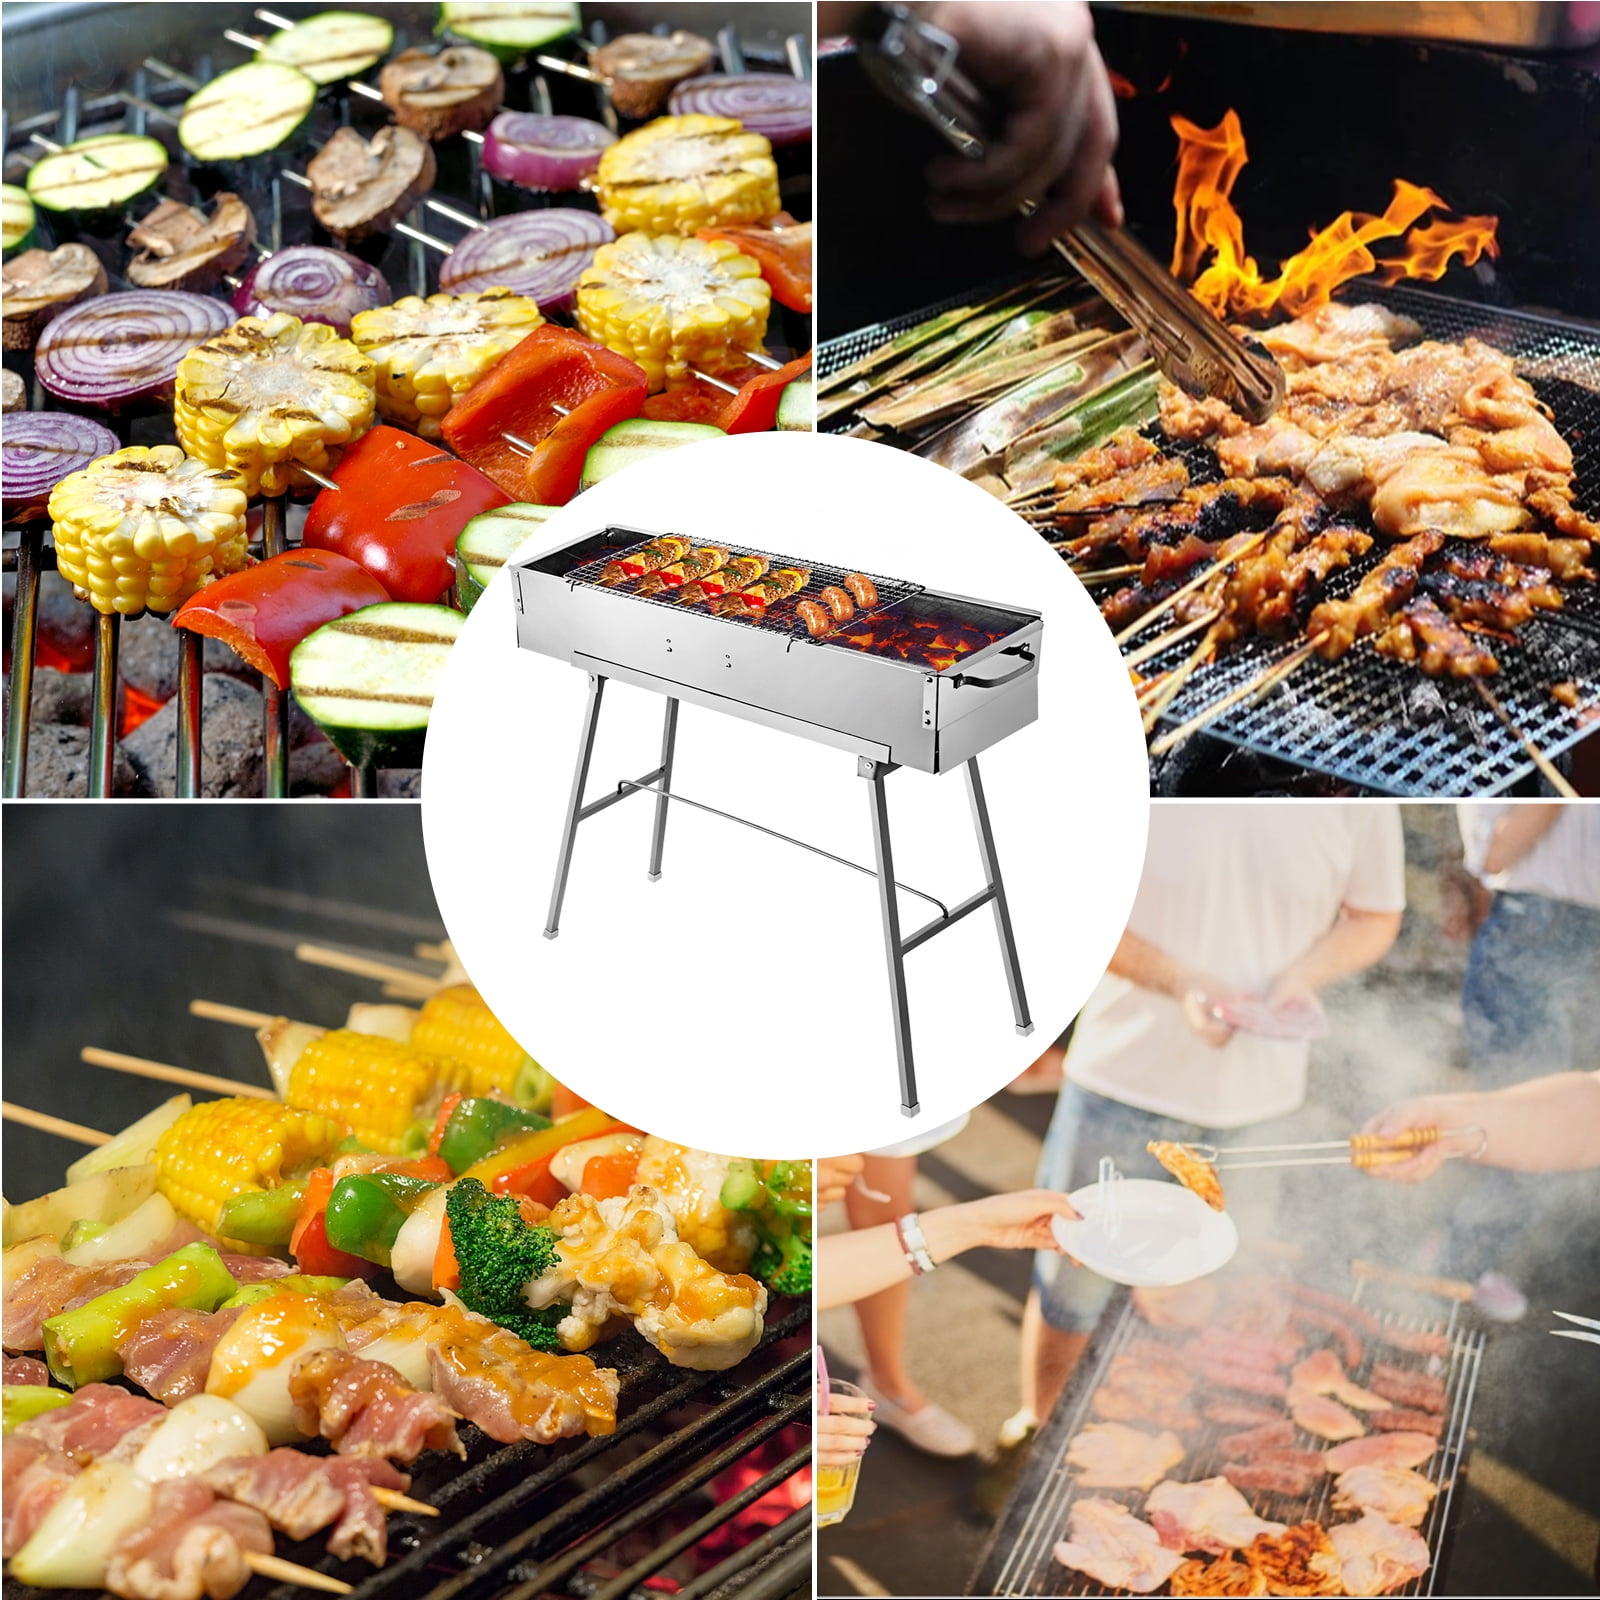 24 x 12 VEVOR Folded Portable Charcoal BBQ Grill Outdoor Barbecue Charcoal Stainless Steel Kebab Grill Folding Grill Portable Grill Perfect for Camping 